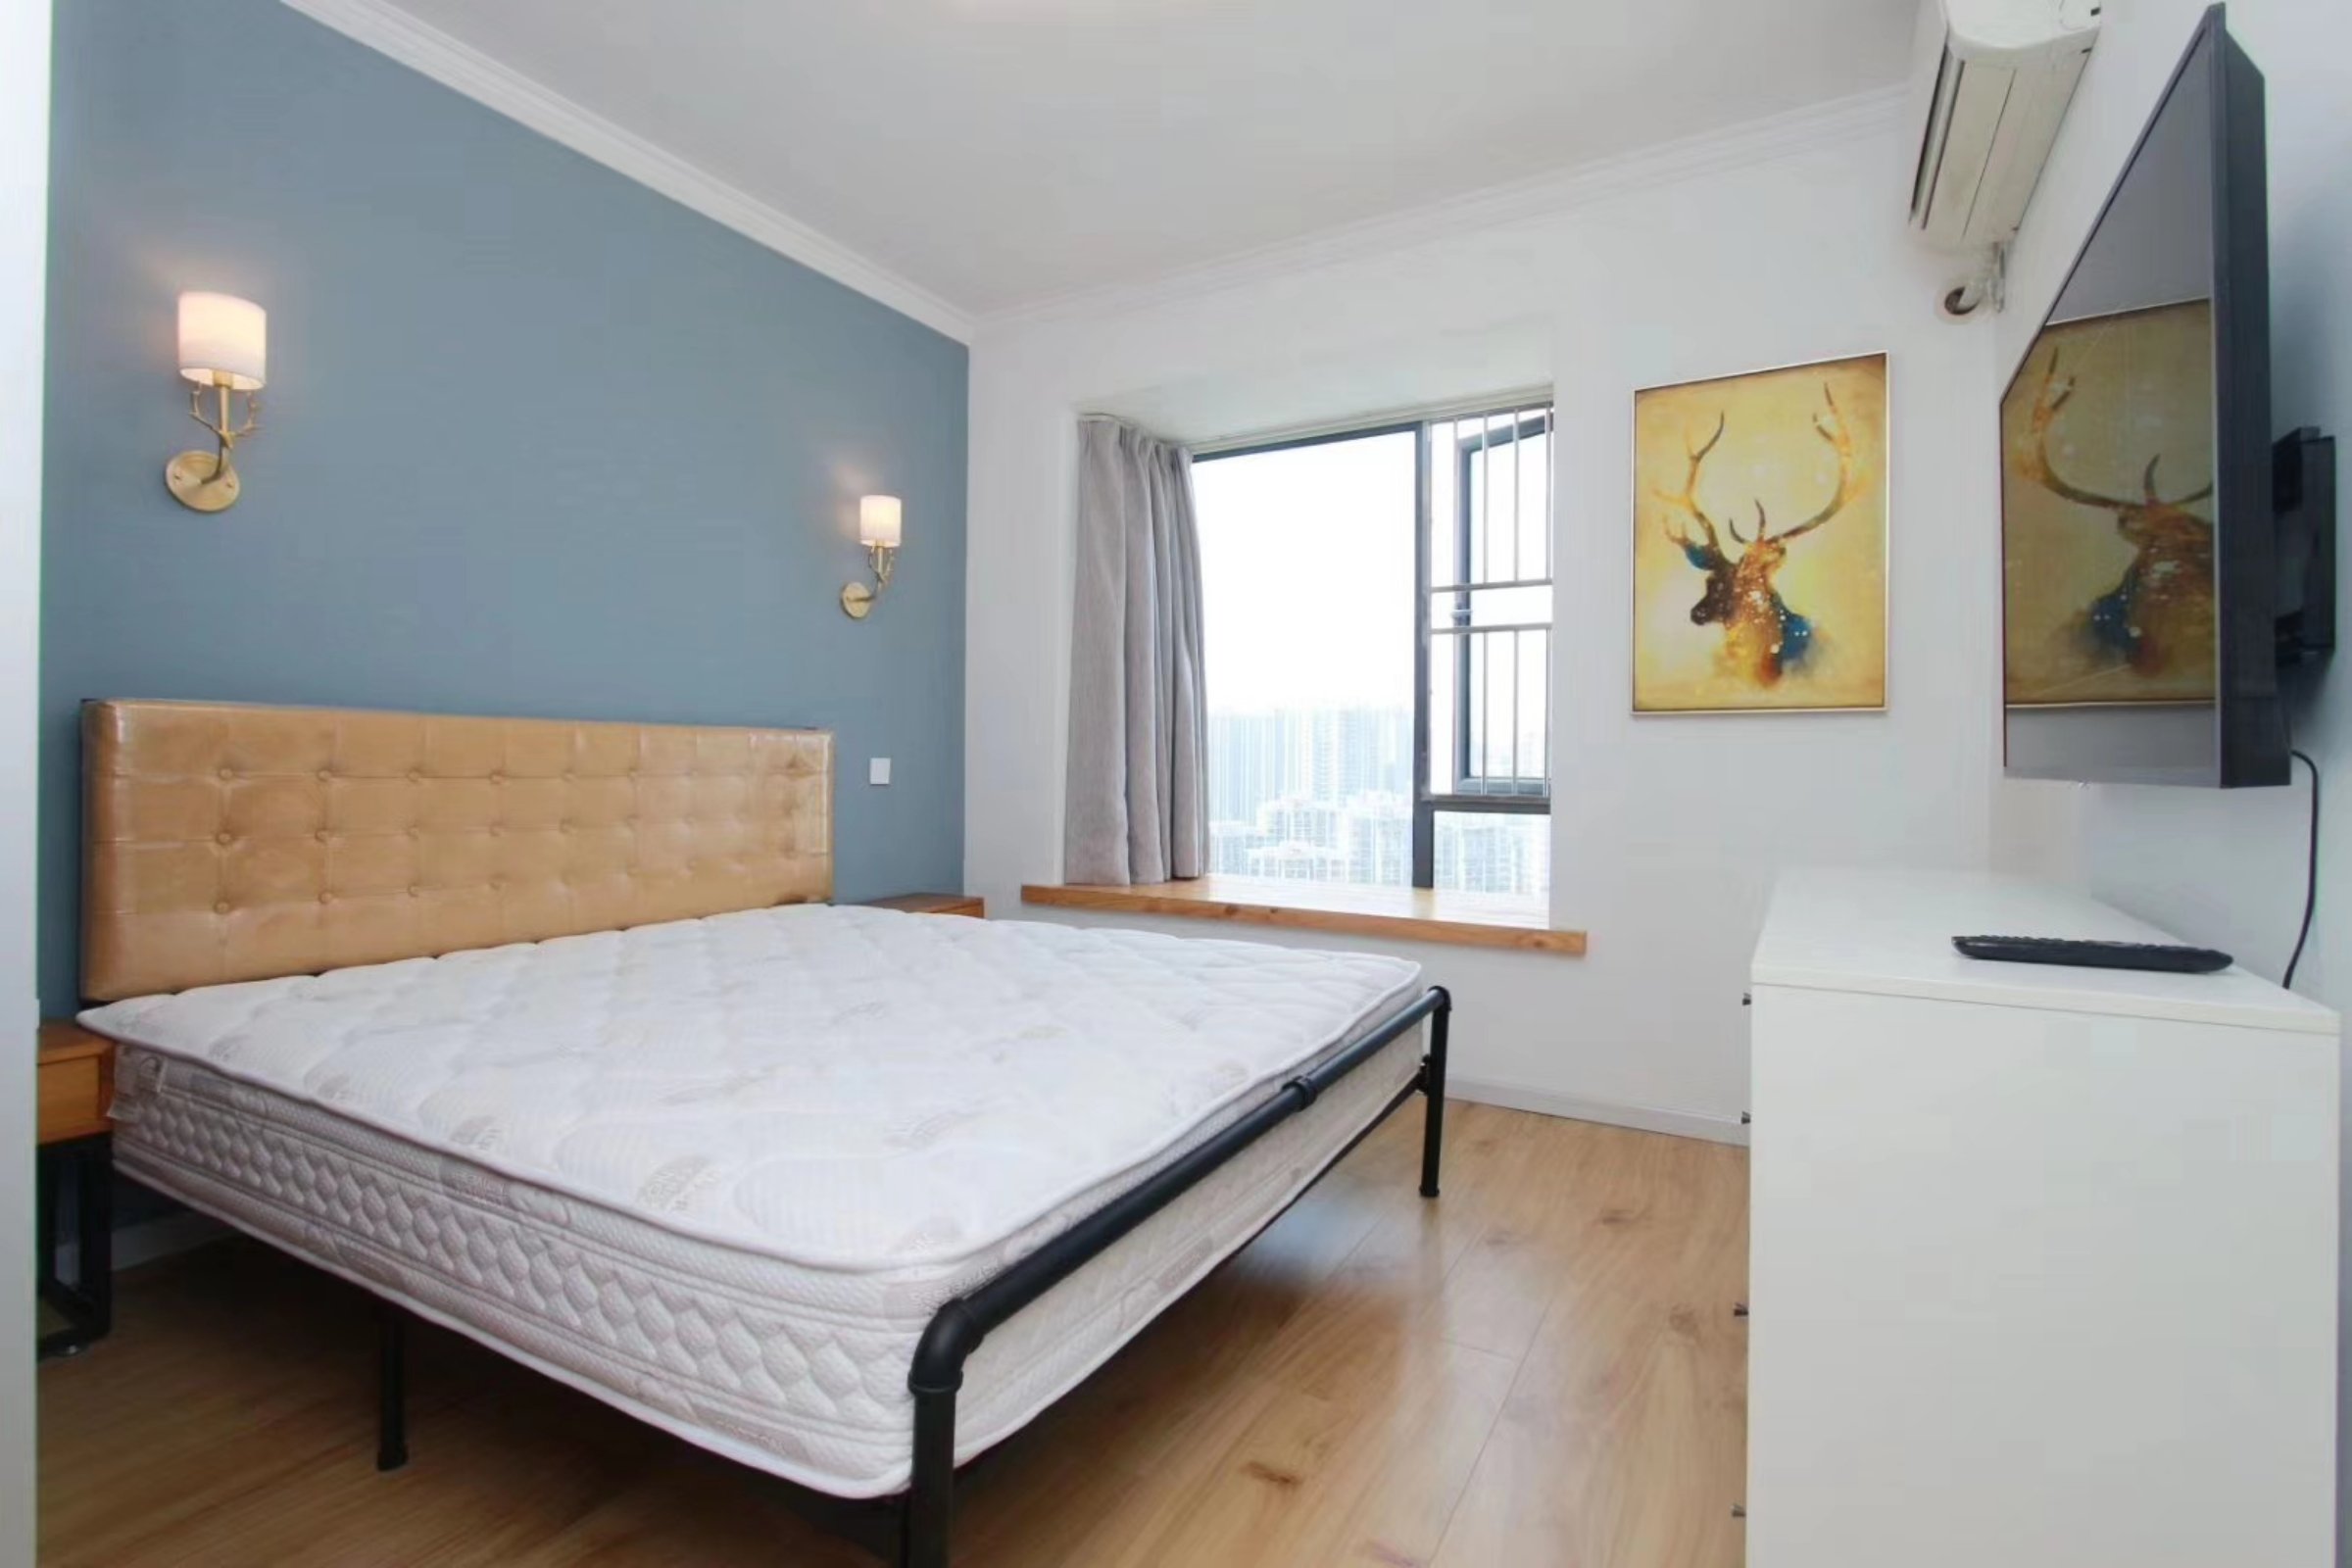 new furniture Modern Apt nr LN 7/13 w Great Views in Shanghai’s Jing’an Area for Rent